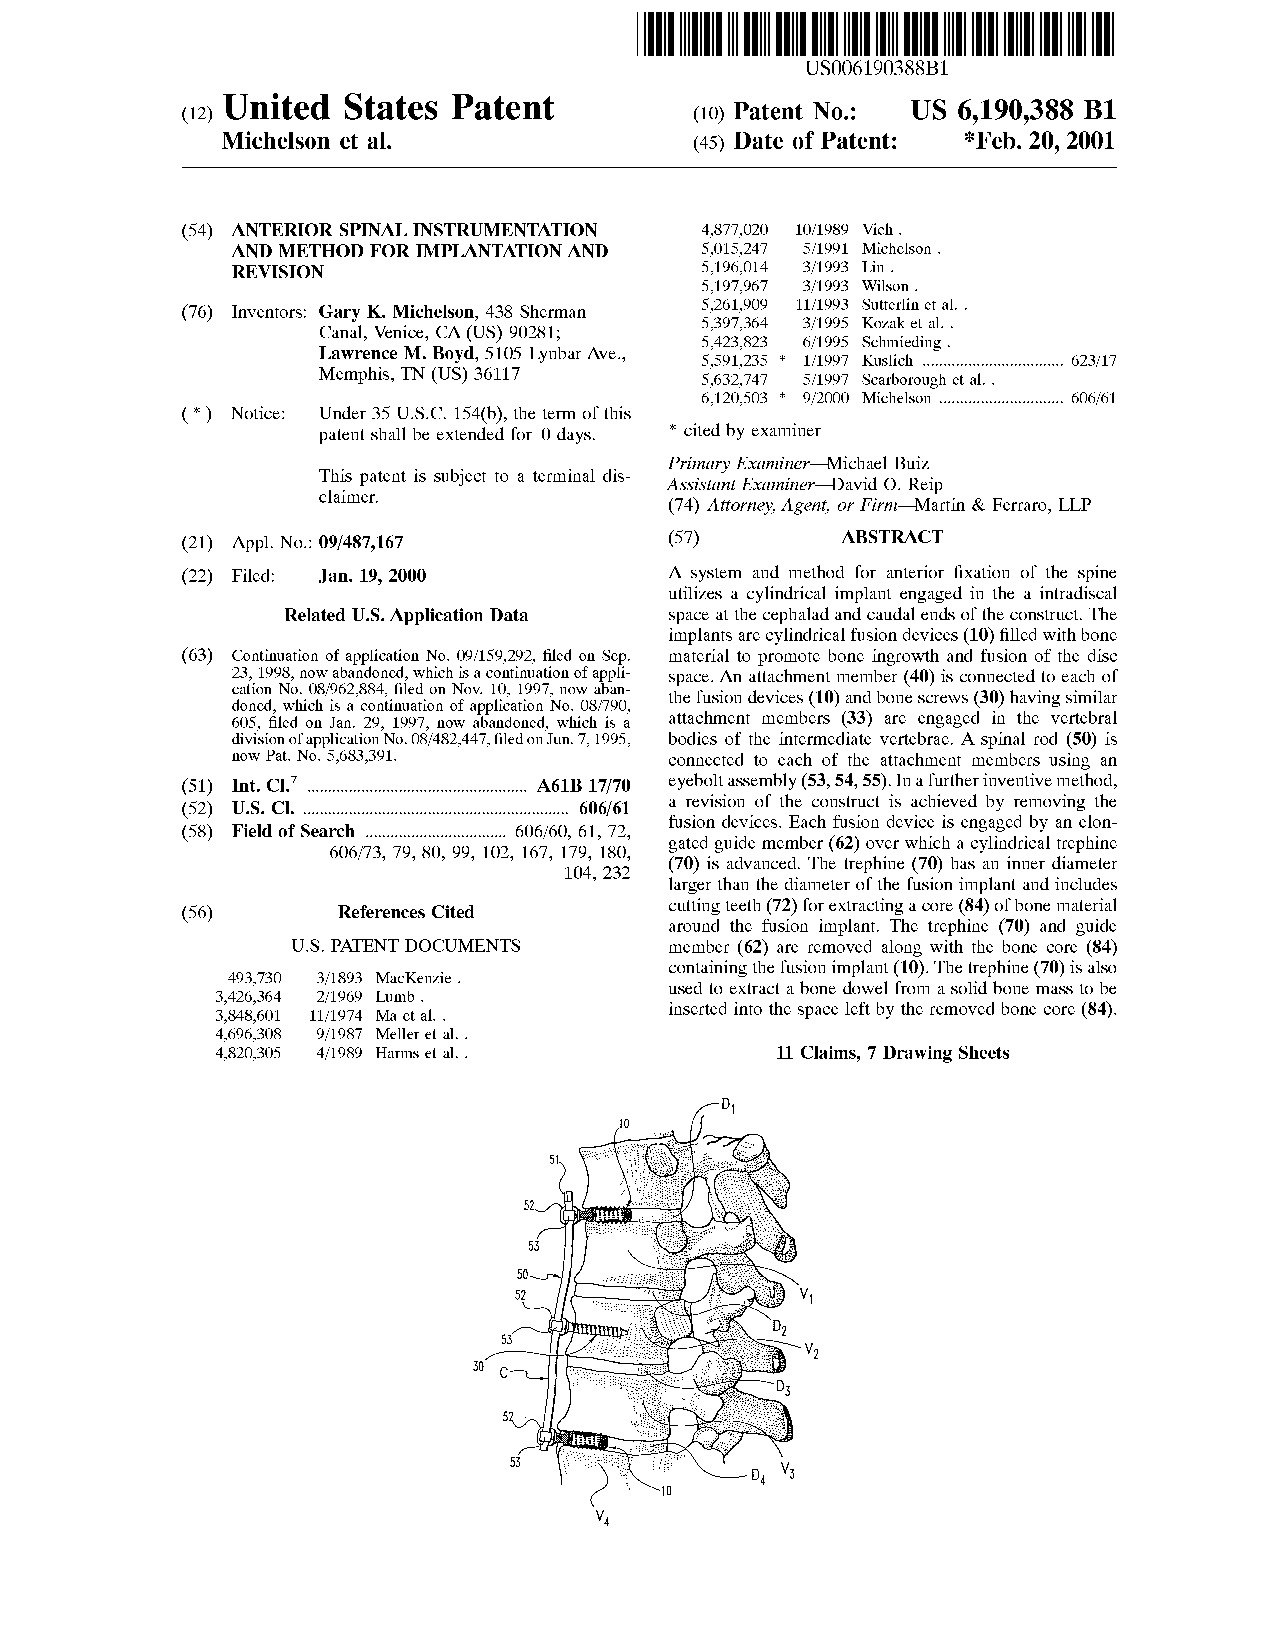 Anterior spinal instrumentation and method for implantation and revision - Patent 6,190,388